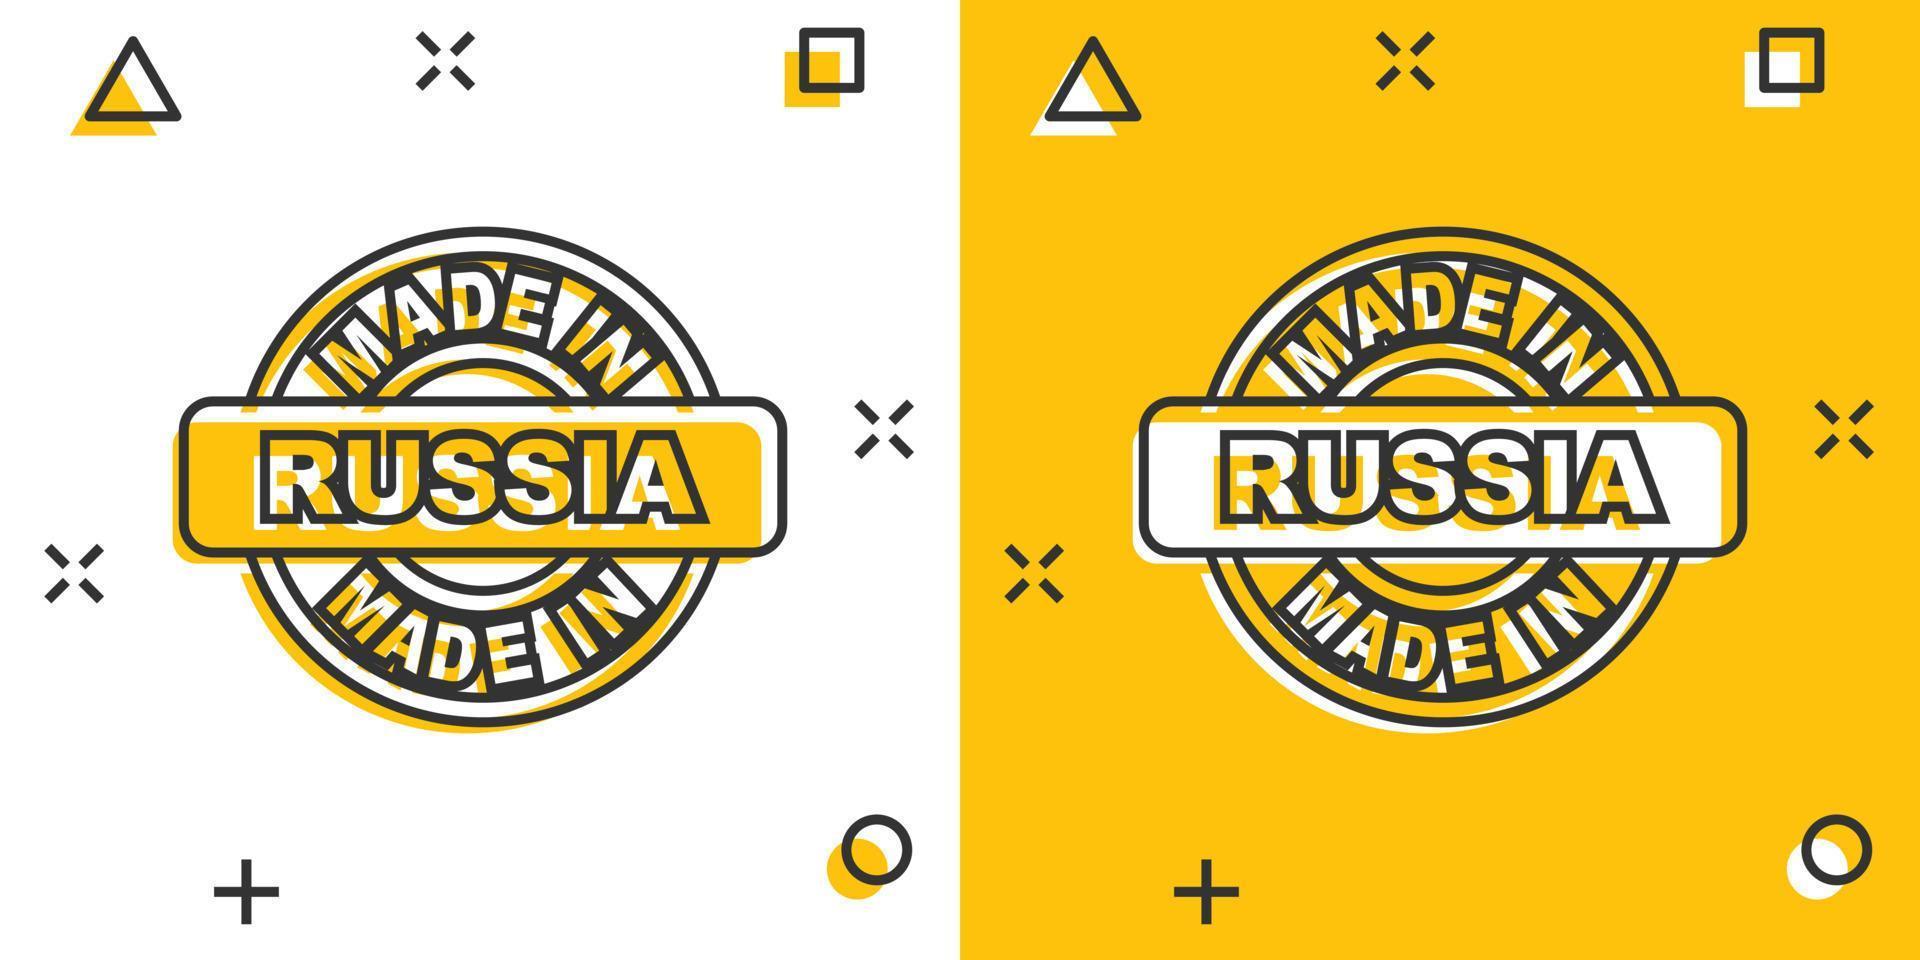 Cartoon made in Russia icon in comic style. Manufactured illustration pictogram. Produce sign splash business concept. vector